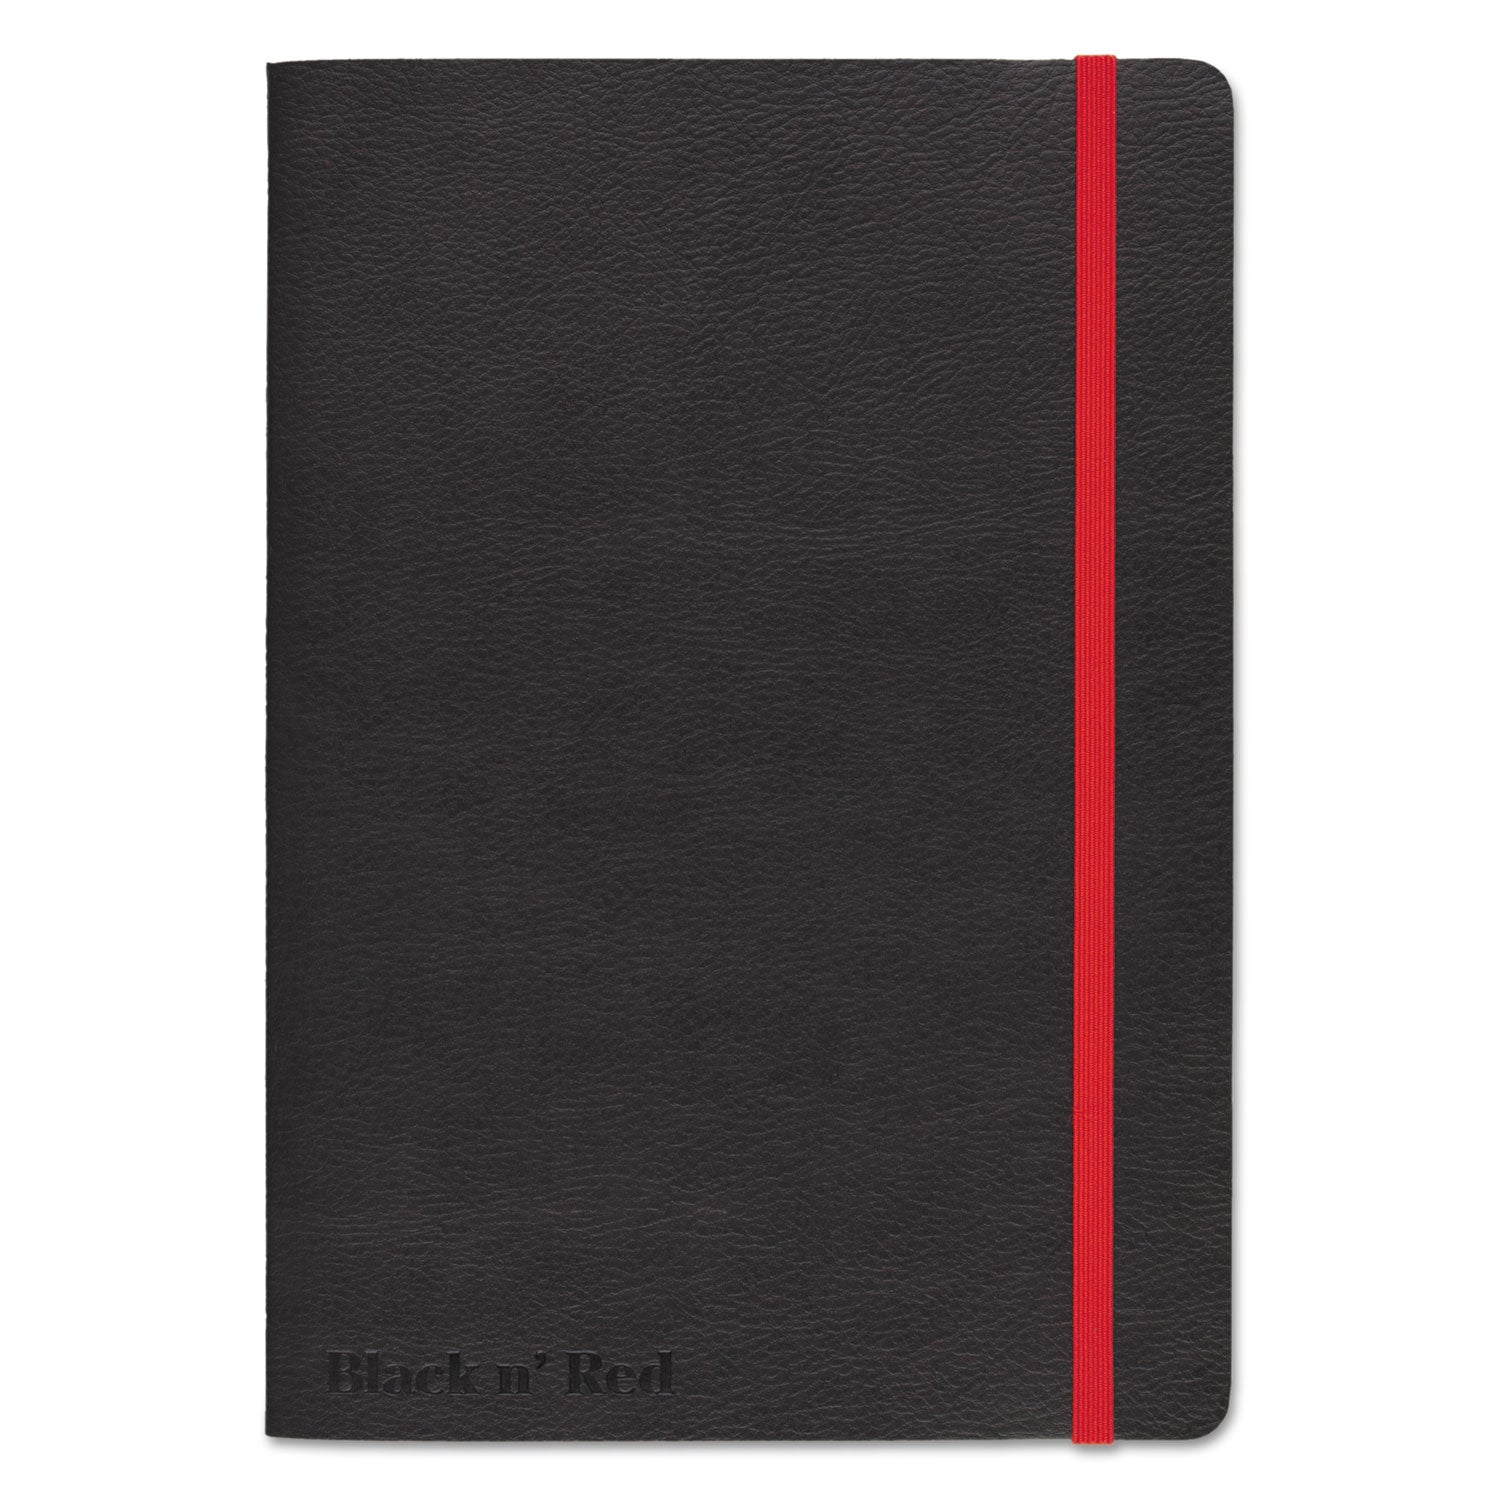 Flexible Cover Casebound Notebooks, SCRIBZEE Compatible, 1-Subject, Wide/Legal Rule, Black Cover, (71) 8.25 x 5.75 Sheets - 